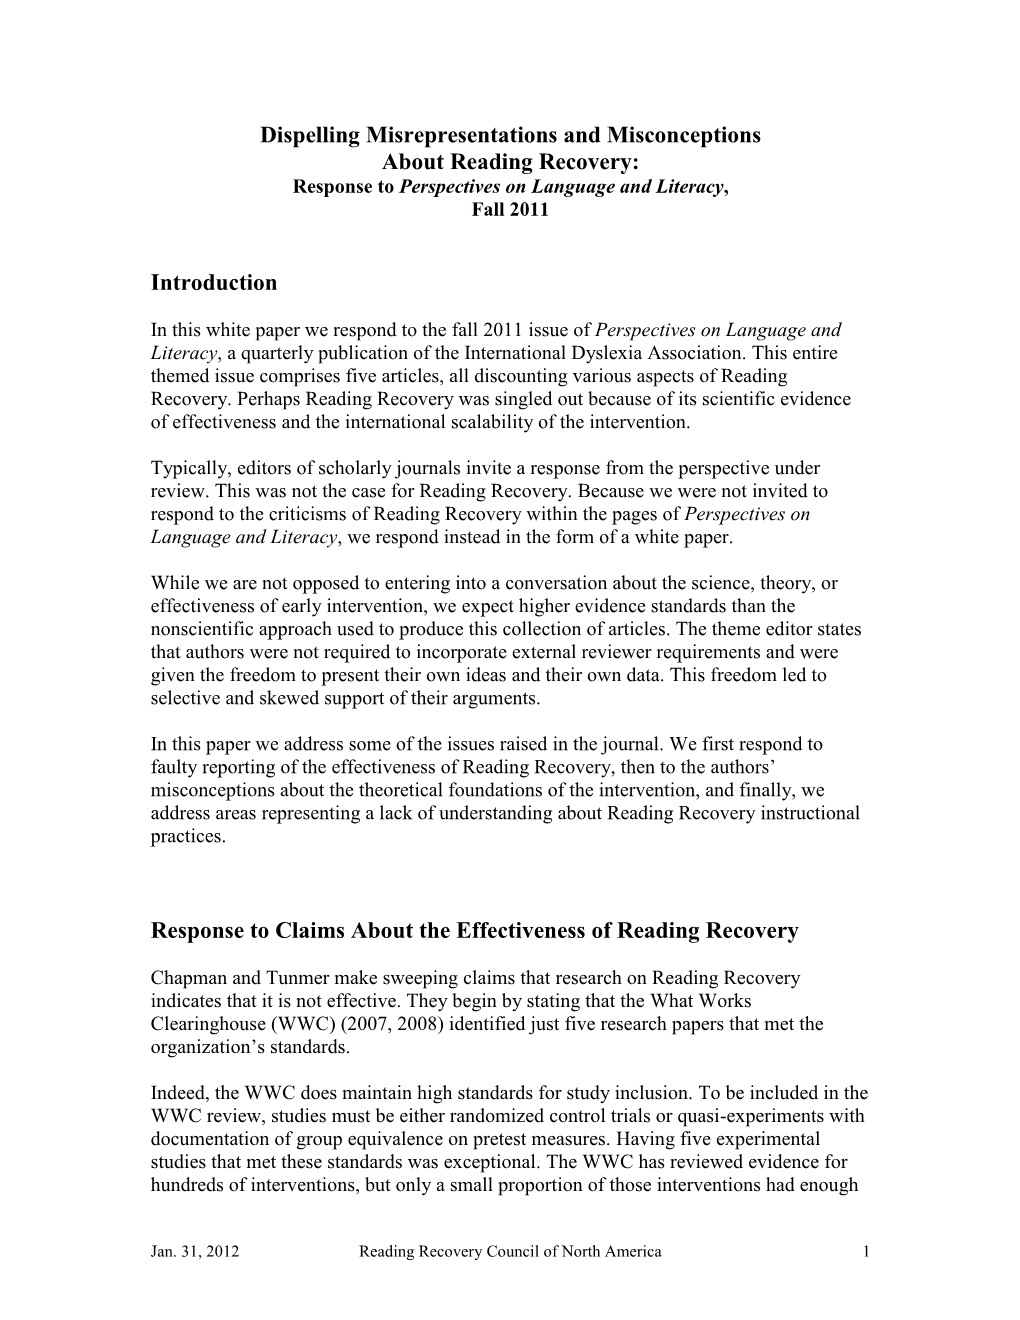 Dispelling Misrepresentations and Misconceptions About Reading Recovery: Response to Perspectives on Language and Literacy, Fall 2011